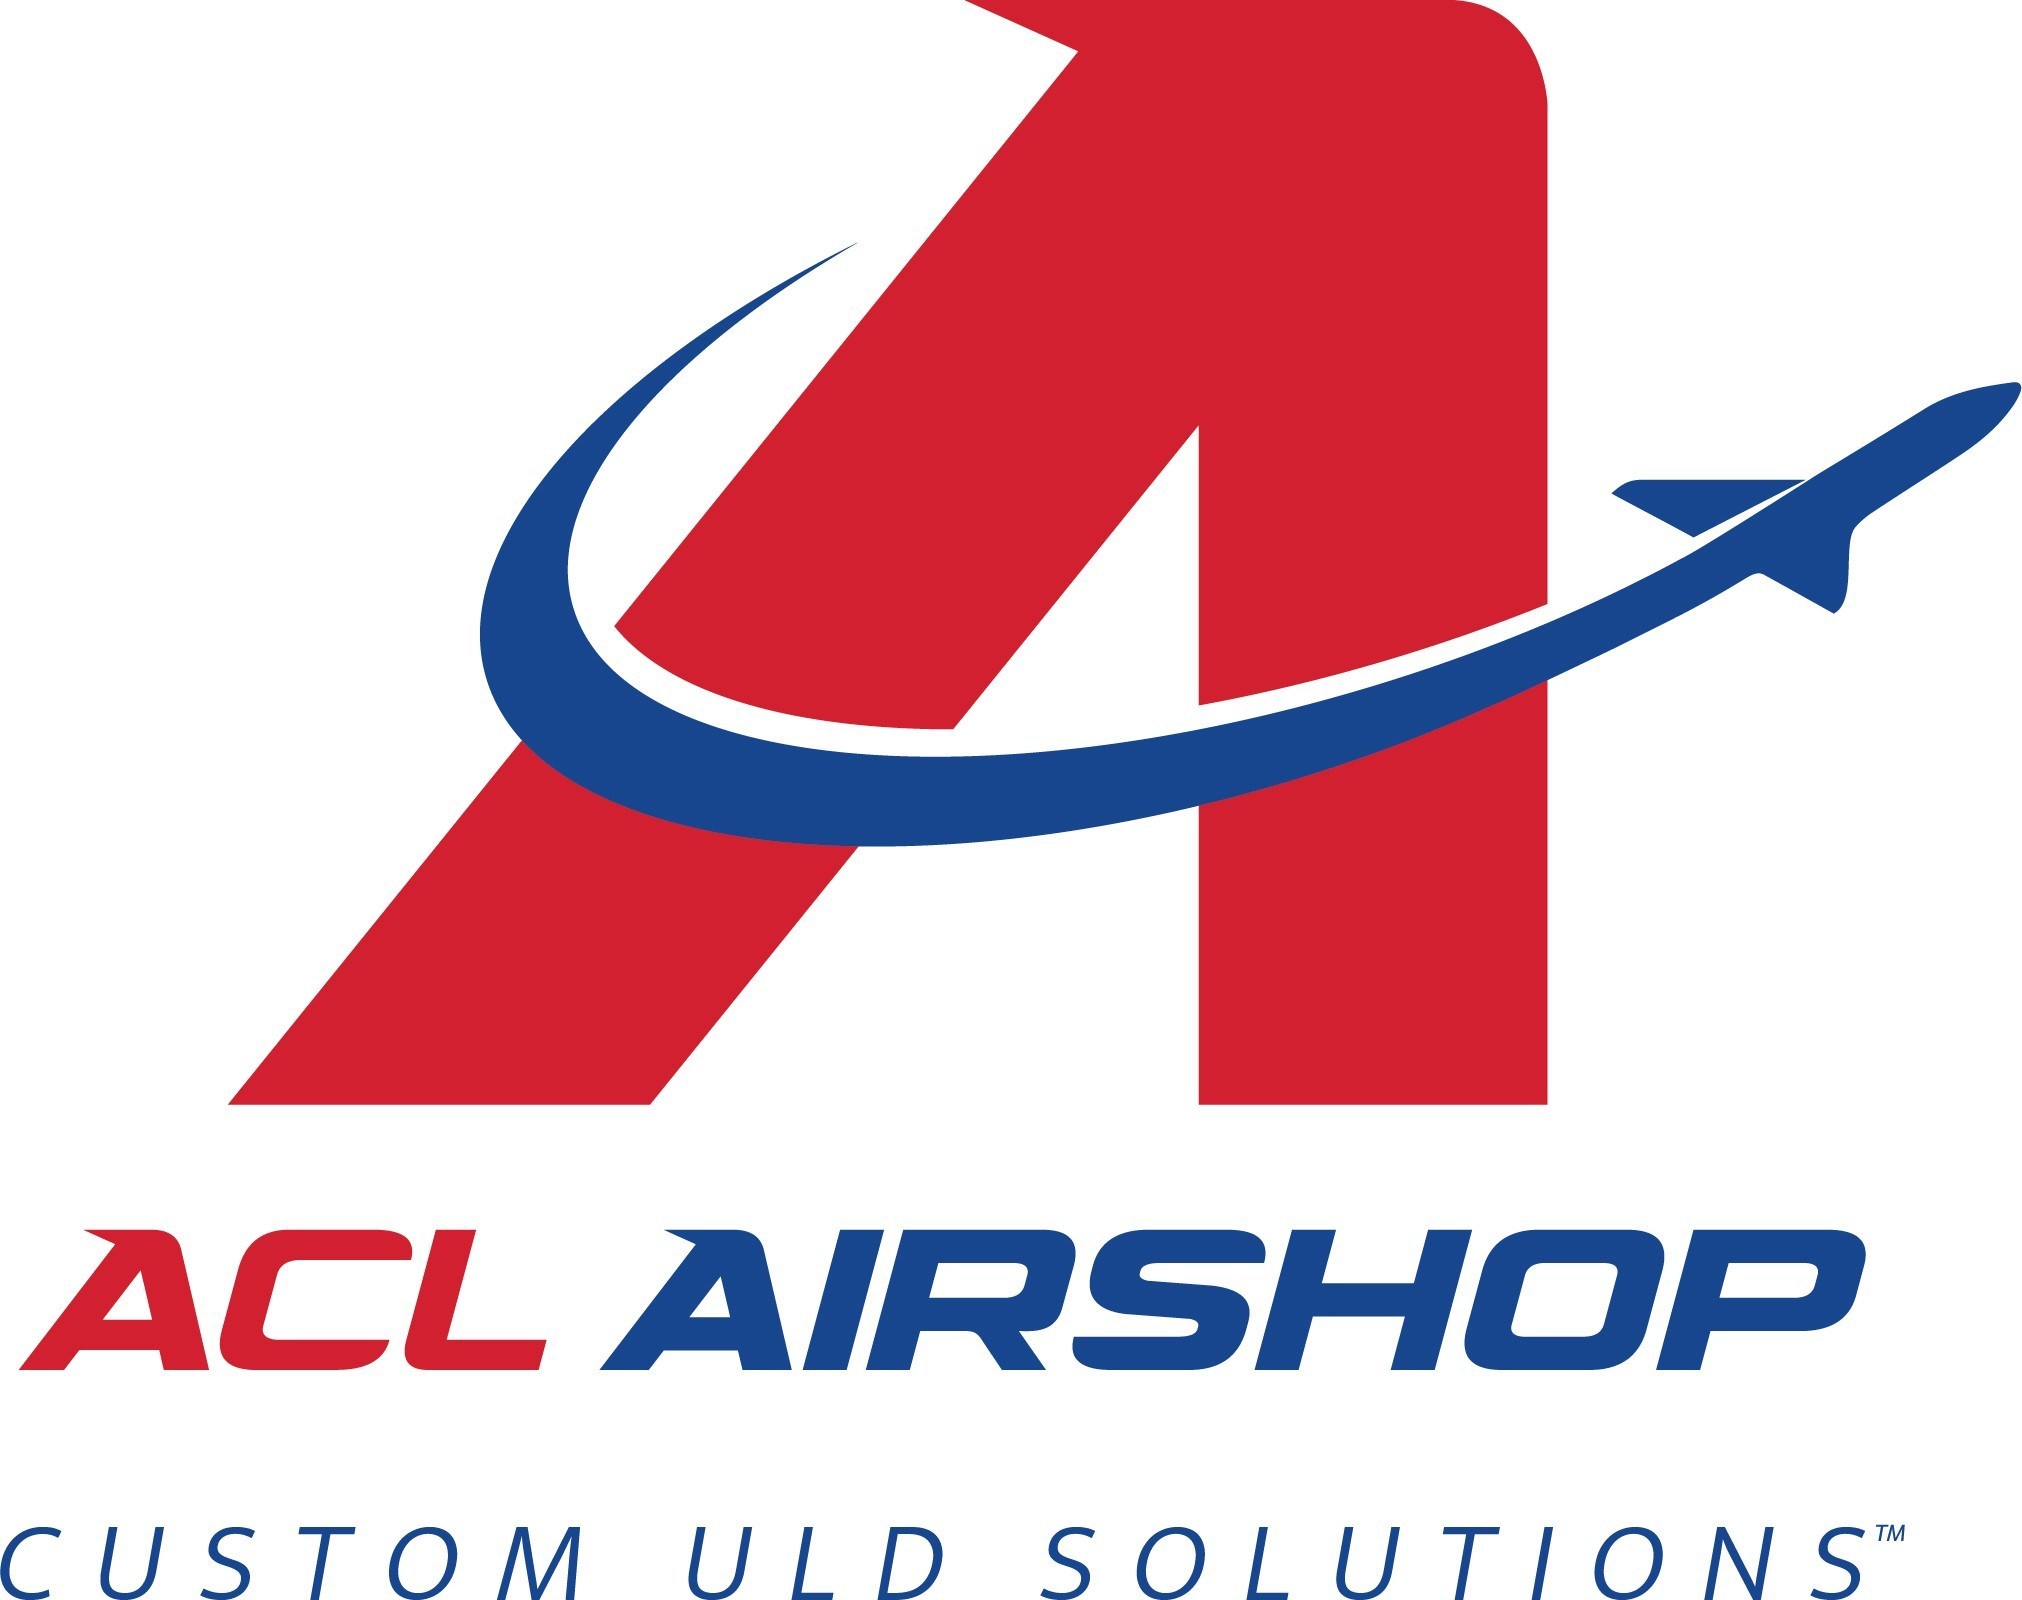 ACL Airshop logo. ACL Airshop is a technology-driven air cargo logistics services and manufacturing specialist with expert coverage at more than 50 of the world's top 100 cargo airports on 6 continents, serving 200 of the world's major airlines and other transportation customers. For more information visit www.ACLairsop.com. (PRNewsfoto/ACL Airshop)